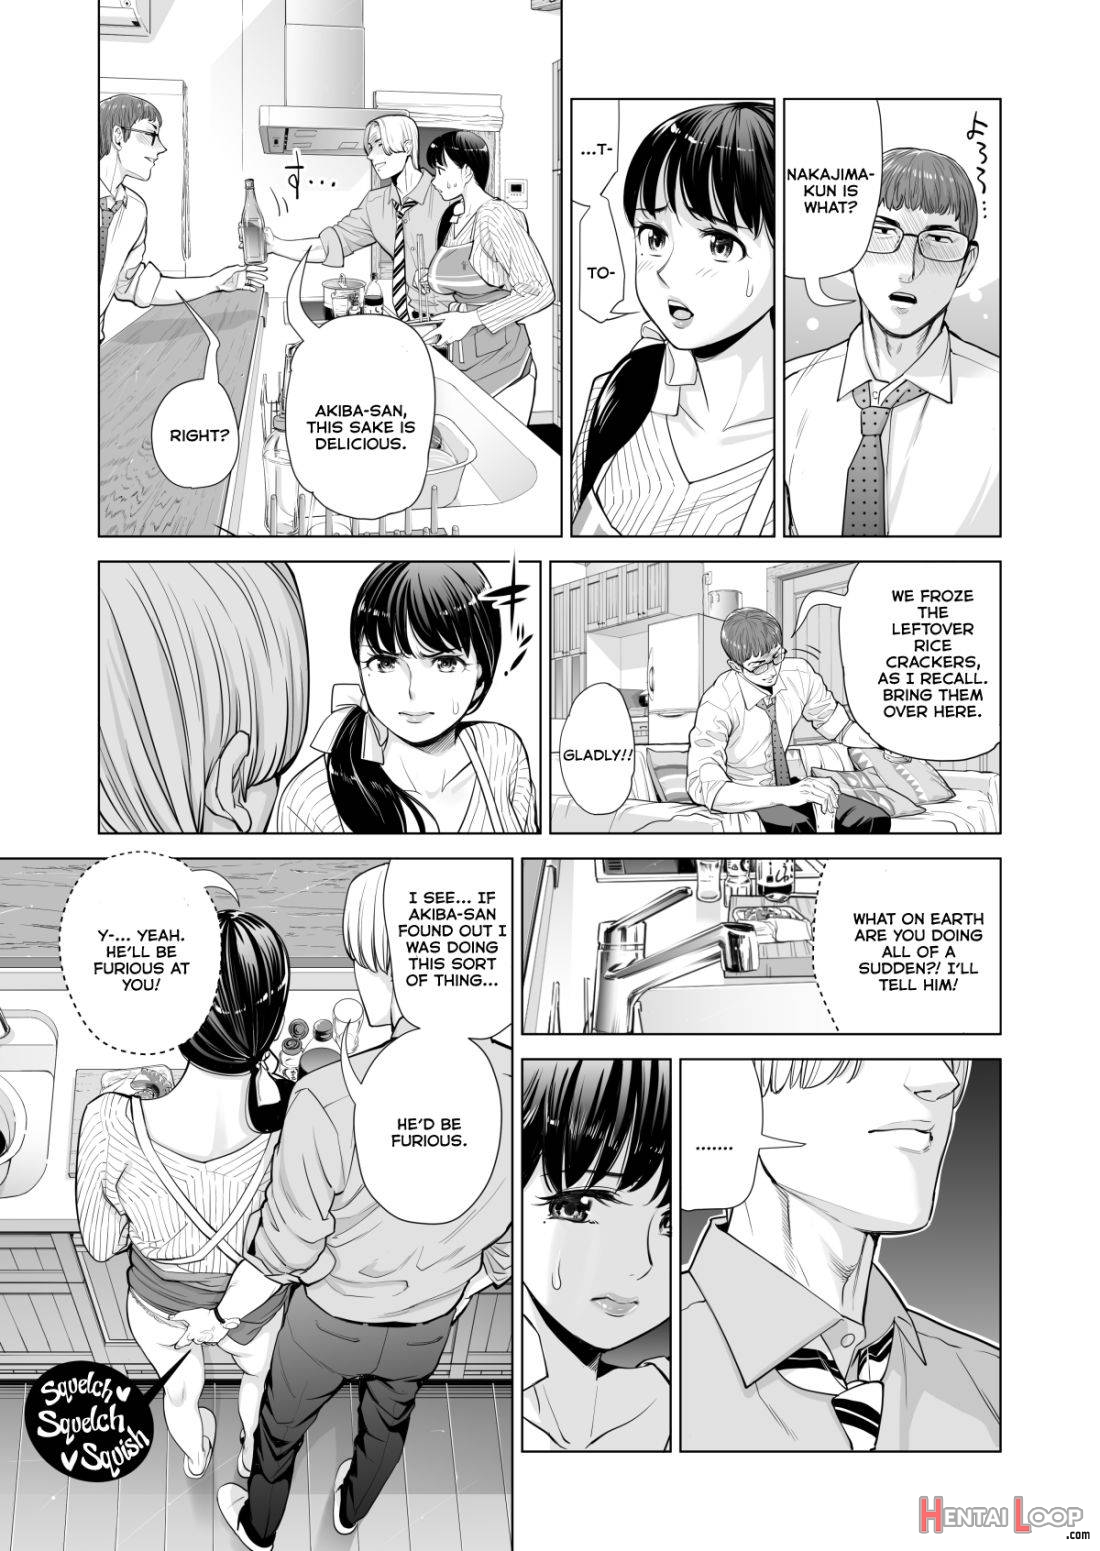 Tsukiyo no Midare Zake (Zenpen) Moonlit Intoxication ~ A Housewife Stolen by a Coworker Besides her Blackout Drunk Husband ~ Chapter 1 page 27